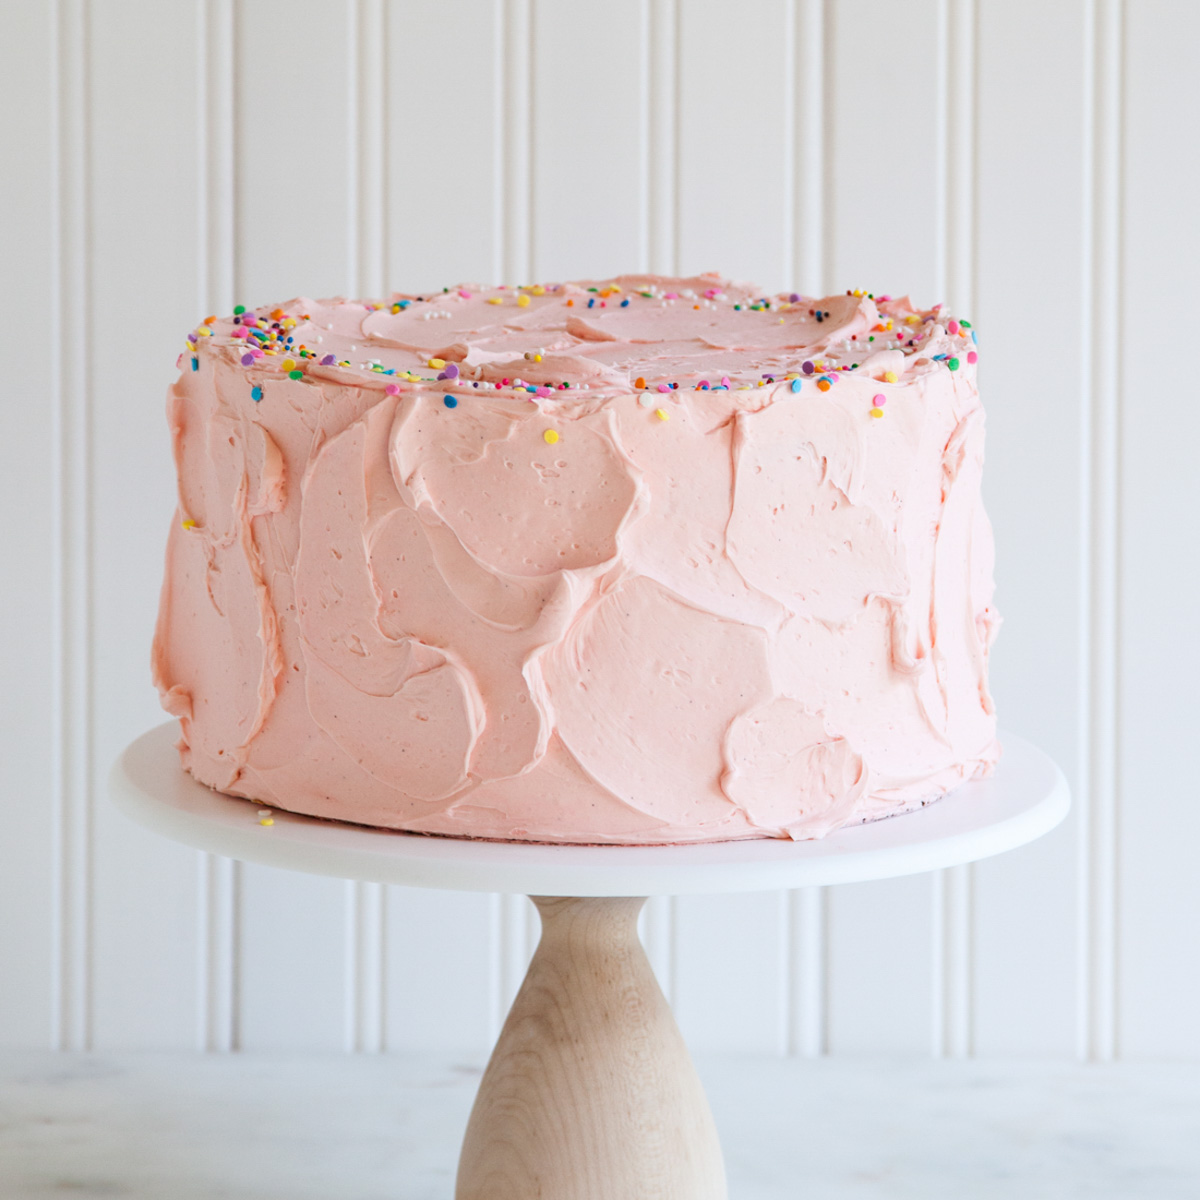 A layer cake with pink Swiss meringue buttercream and sprinkels